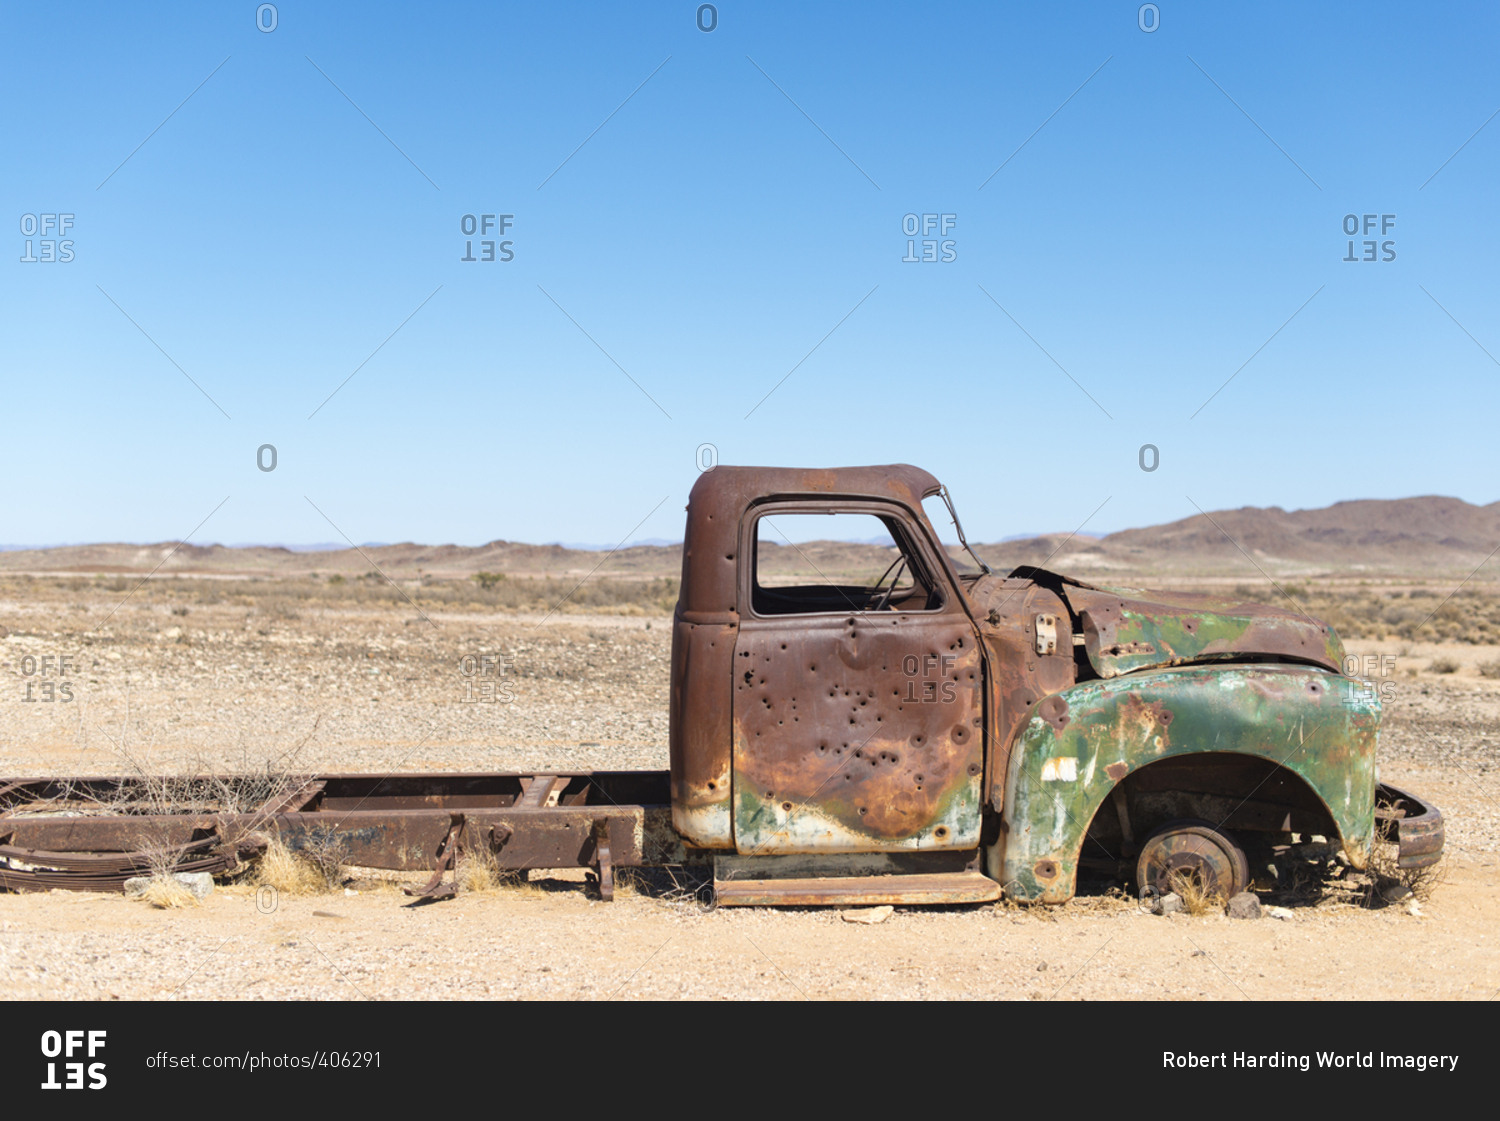 A rusty abandoned truck in the desert near Aus in southern Namibia, Africa